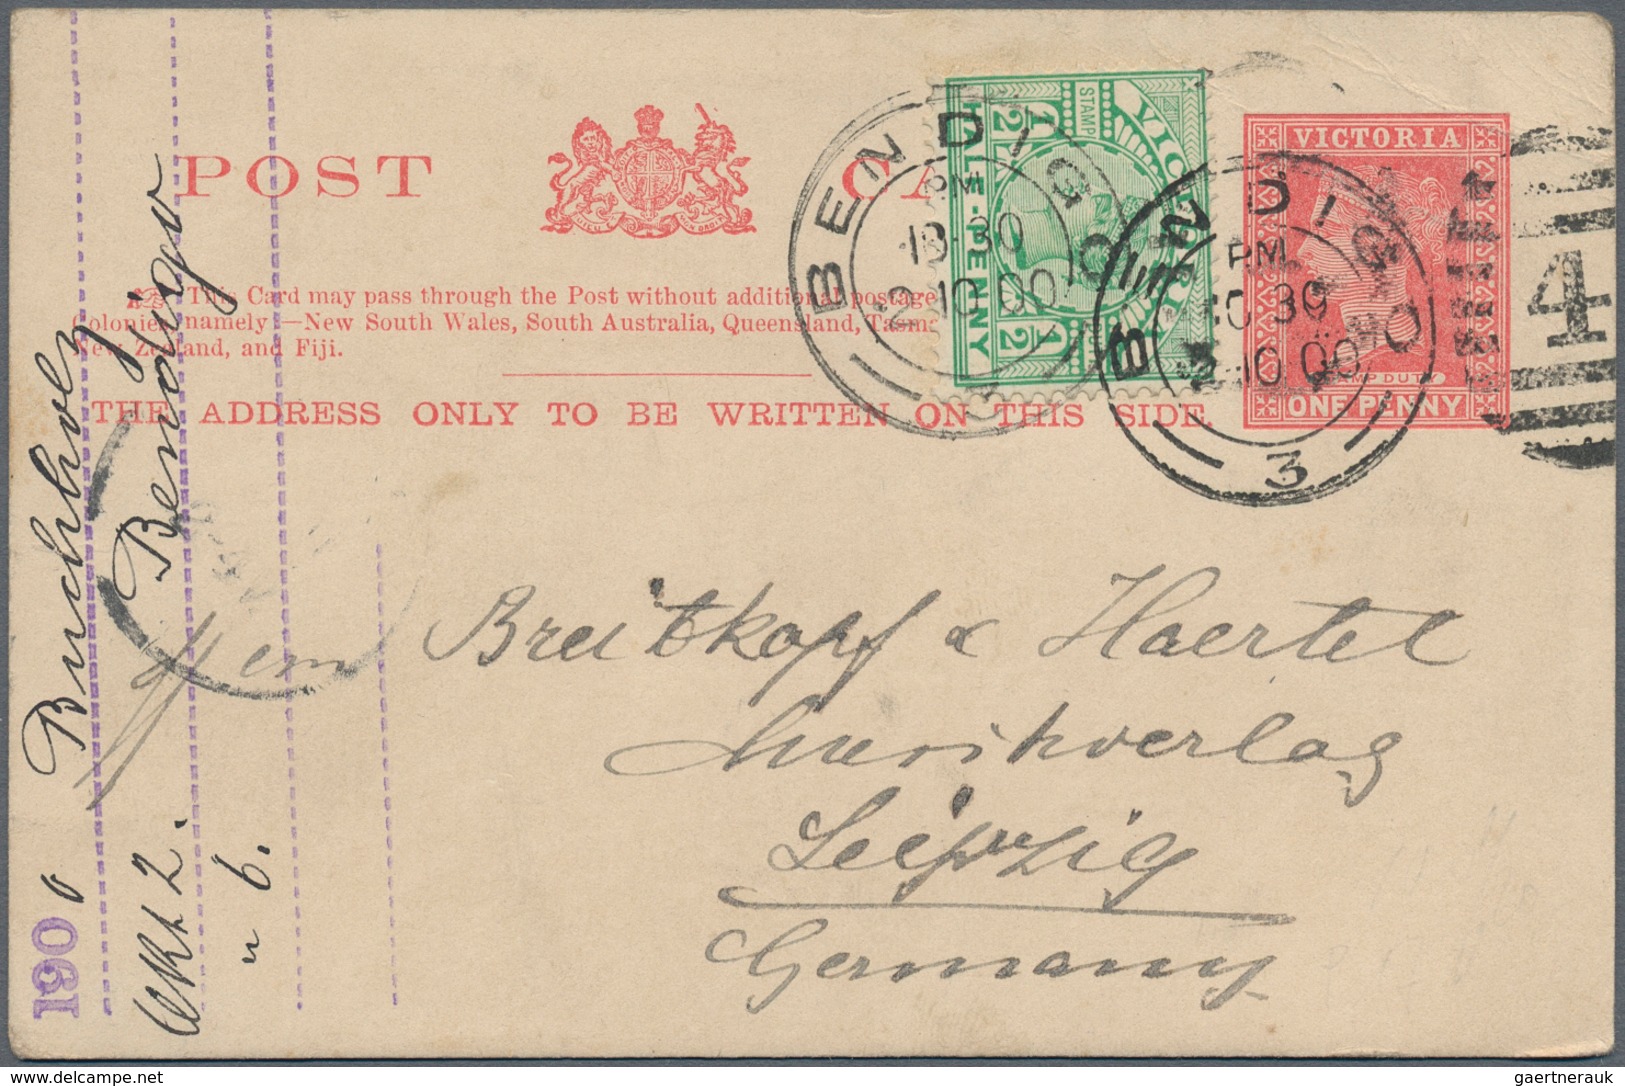 Australische Staaten: 1880/1901 (ca.), mostly used stationery and few covers (34) of Victoria and so